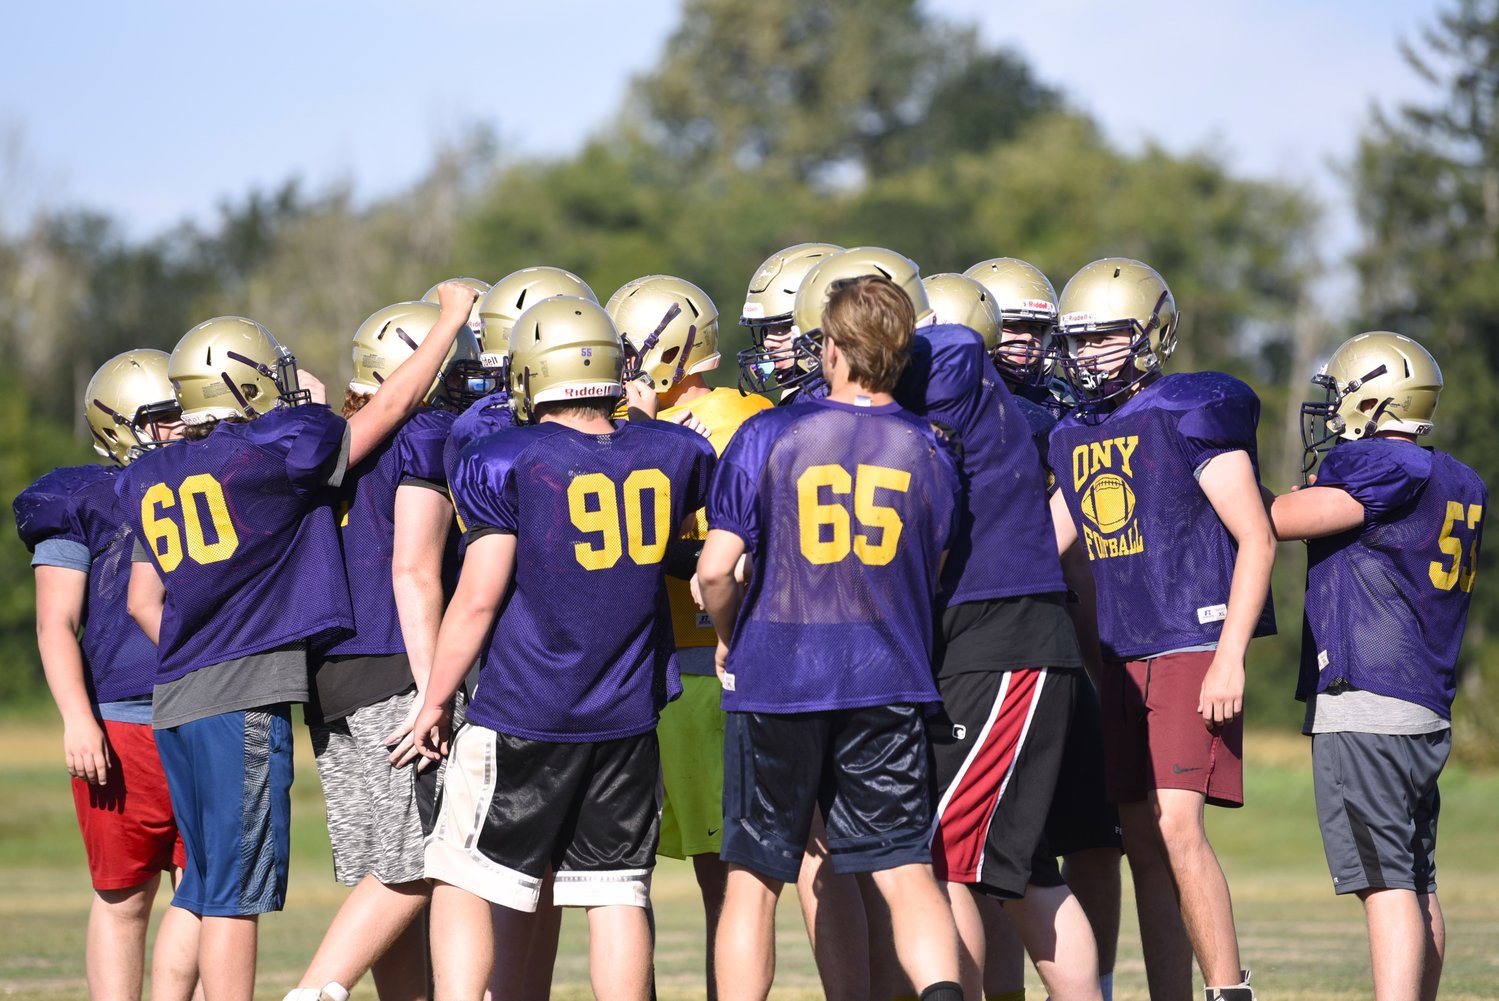 The Onalaska line gets a break after wrapping up individual drills at practice on Aug. 23.